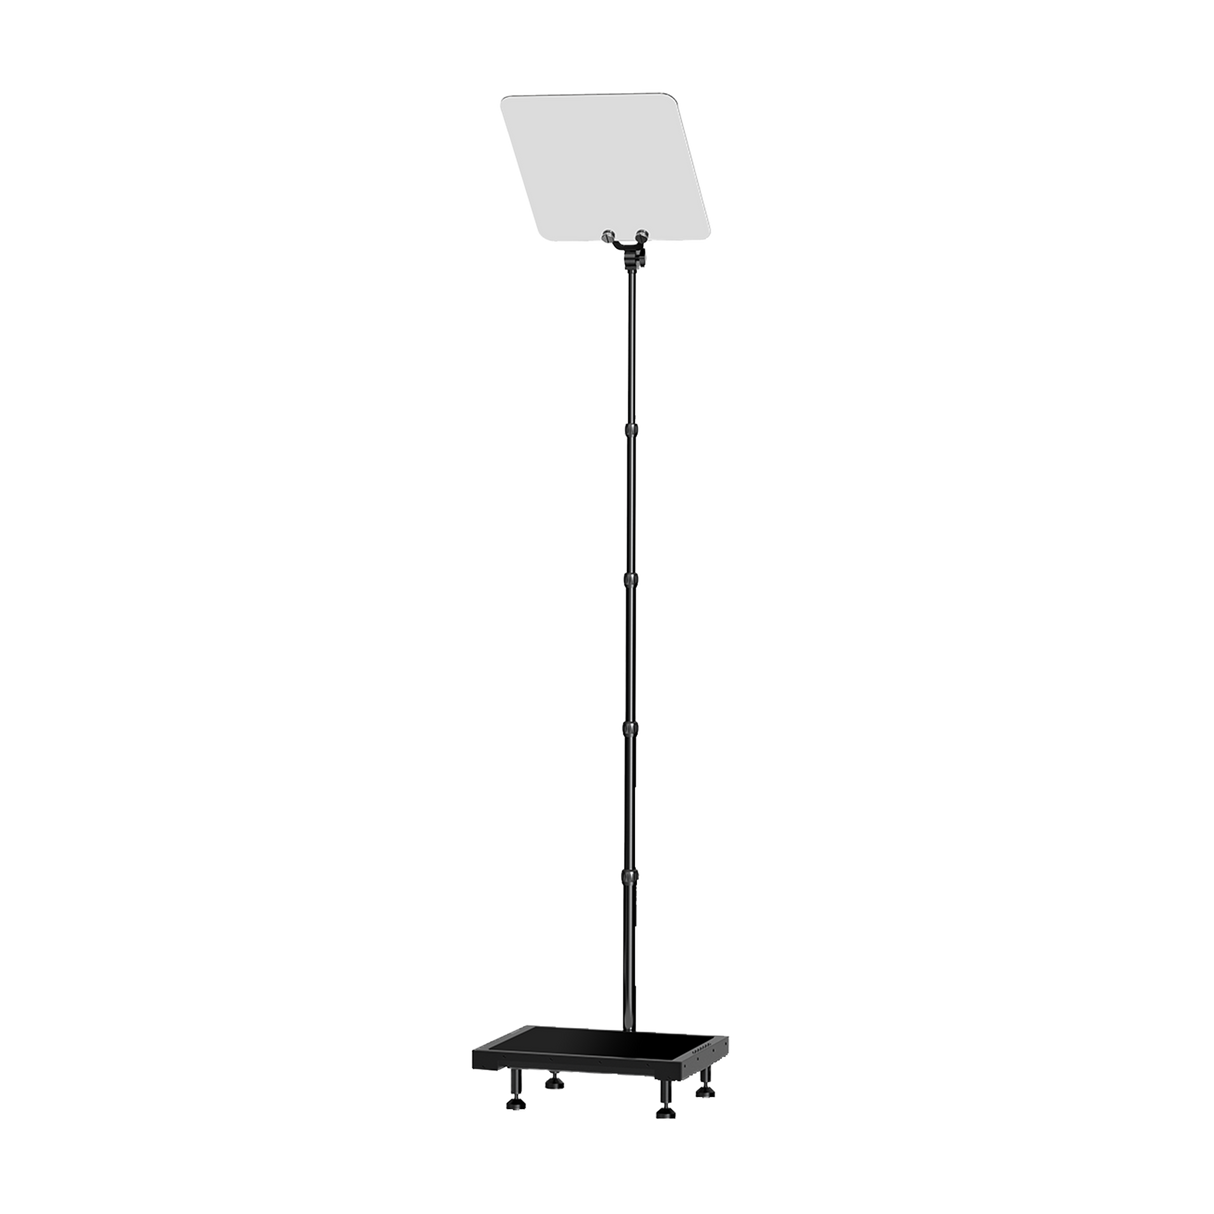 Desview TP300 Teleprompter mit 19"-Monitor